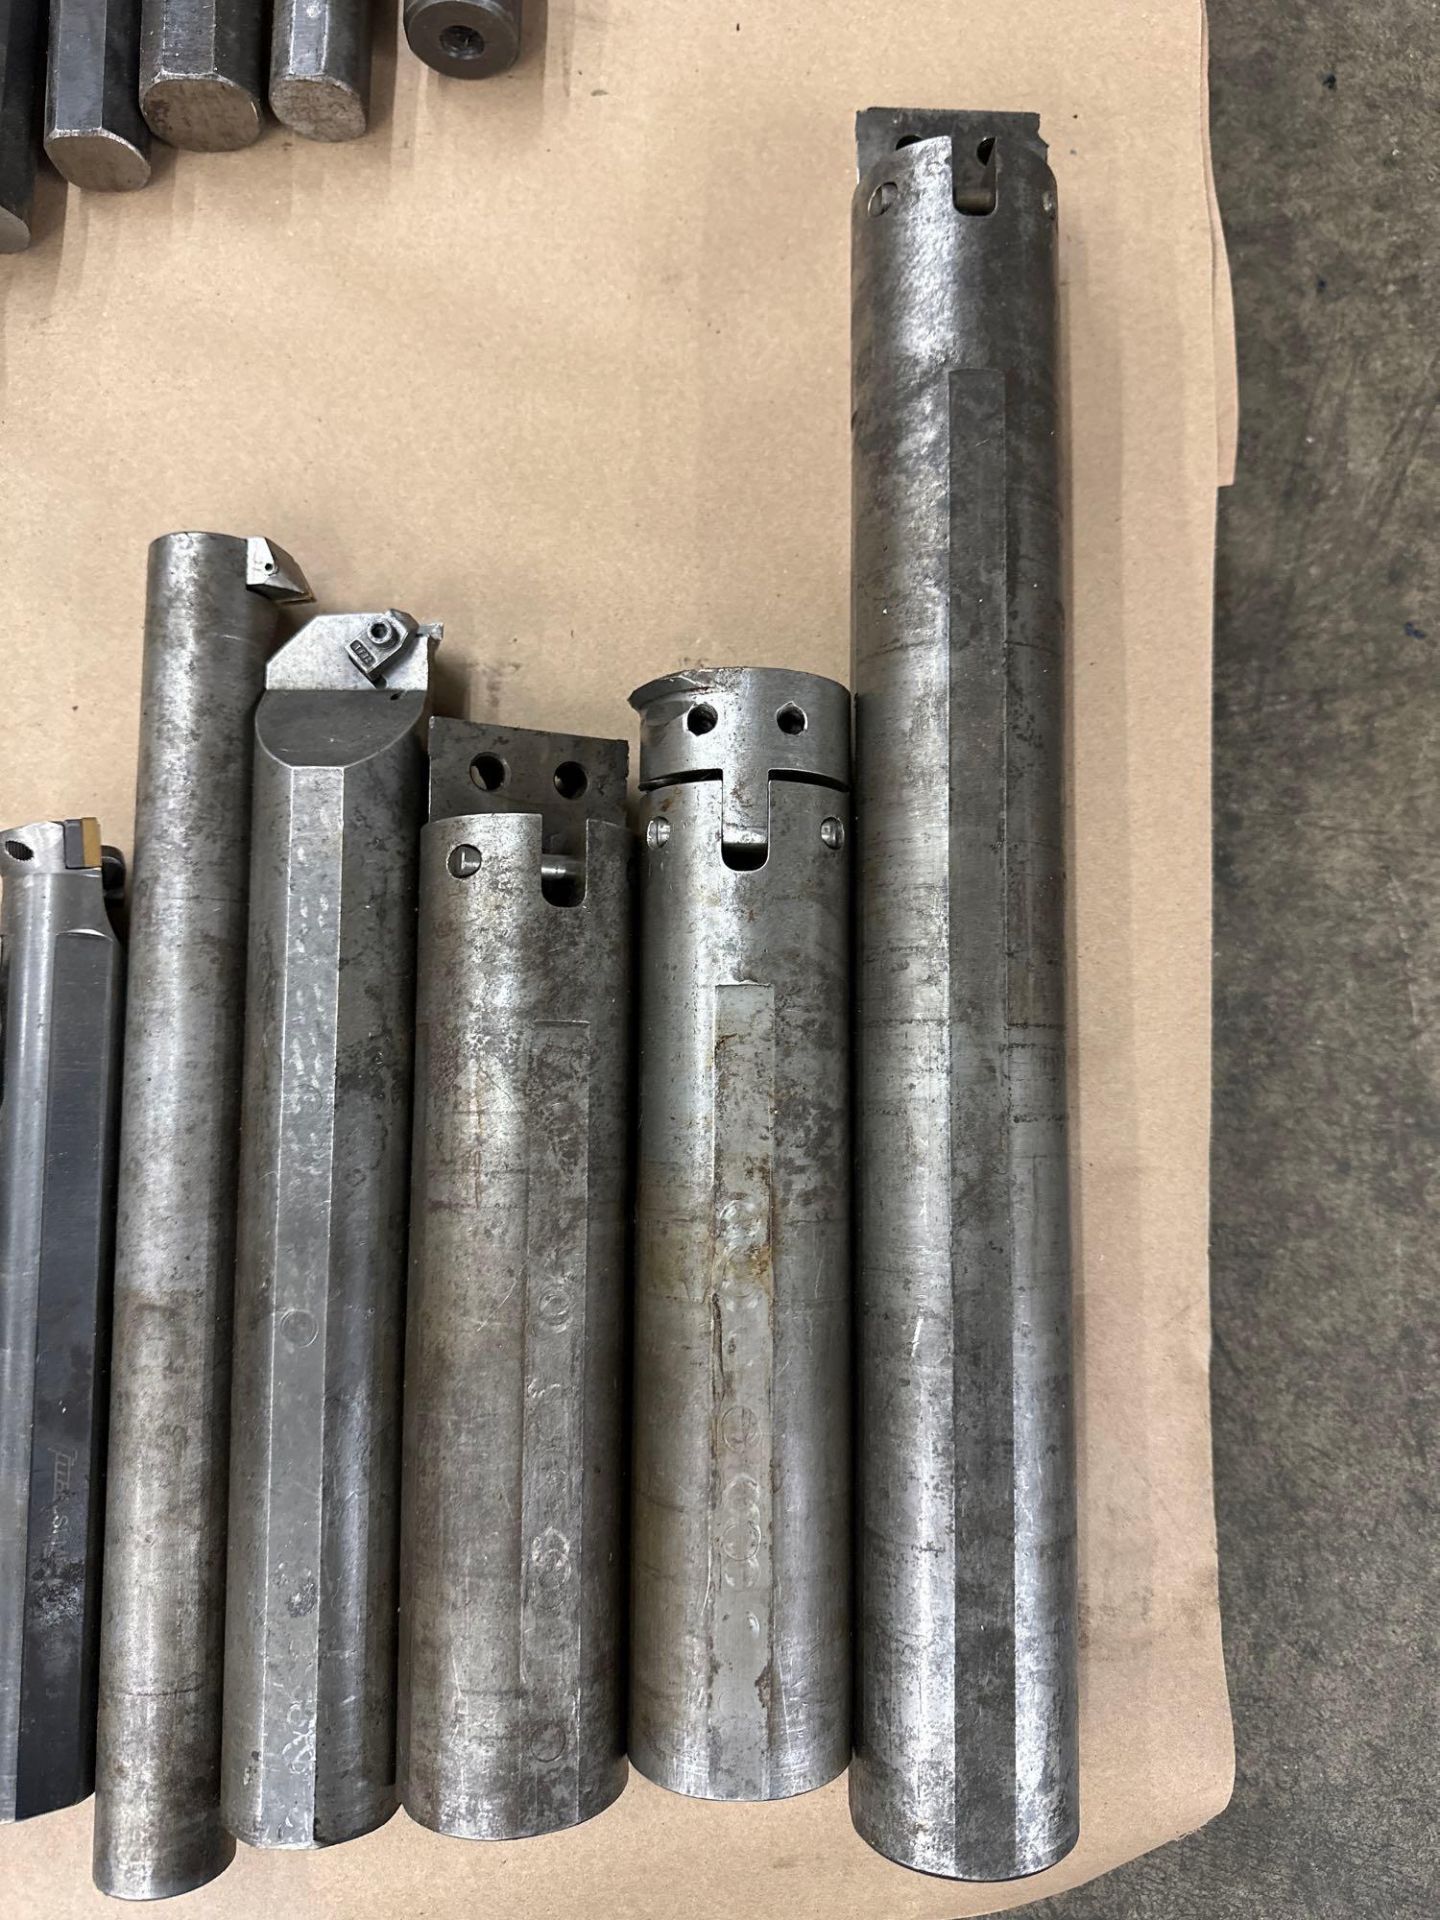 Lot of 10 Assorted Indexable Boring Bars Ranging From: 1” X 5 1/2” To 2 1/2” X 19 3/4” - Image 2 of 6